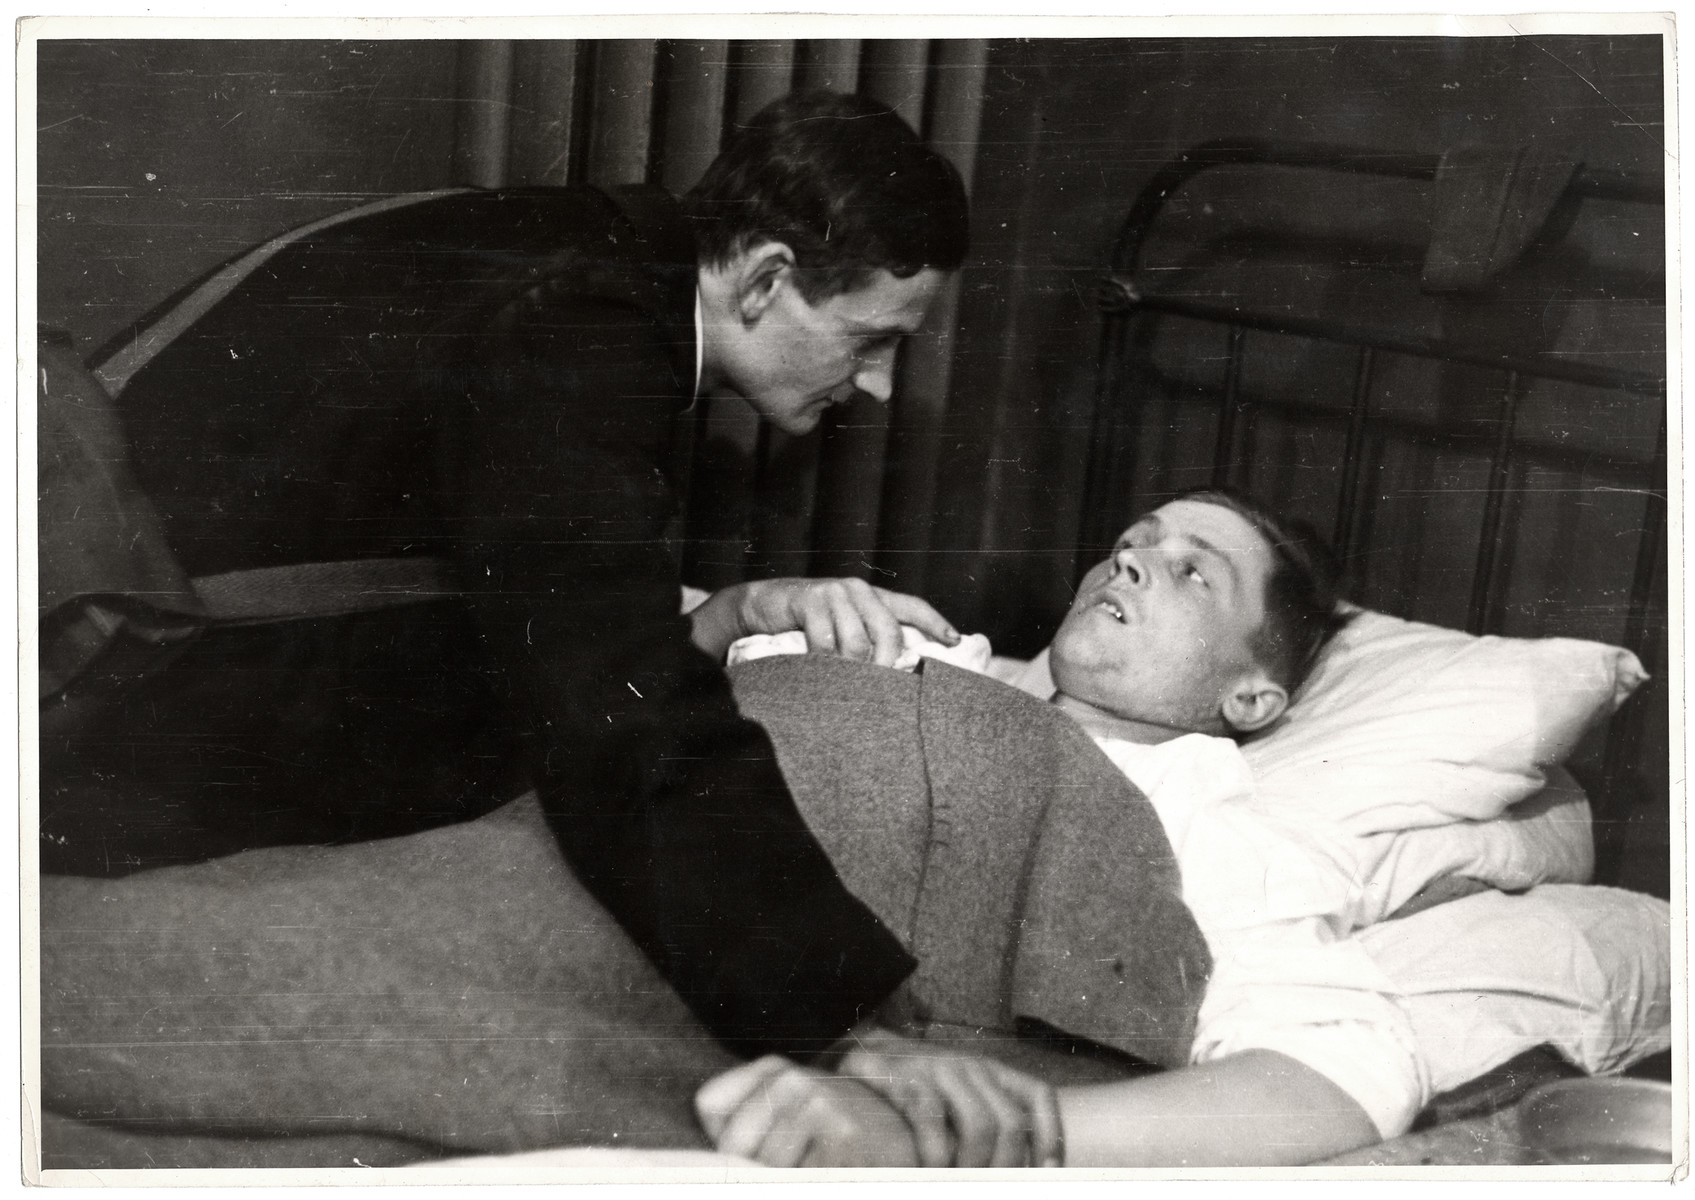 A Polish priest visits a sick/wounded German POW.